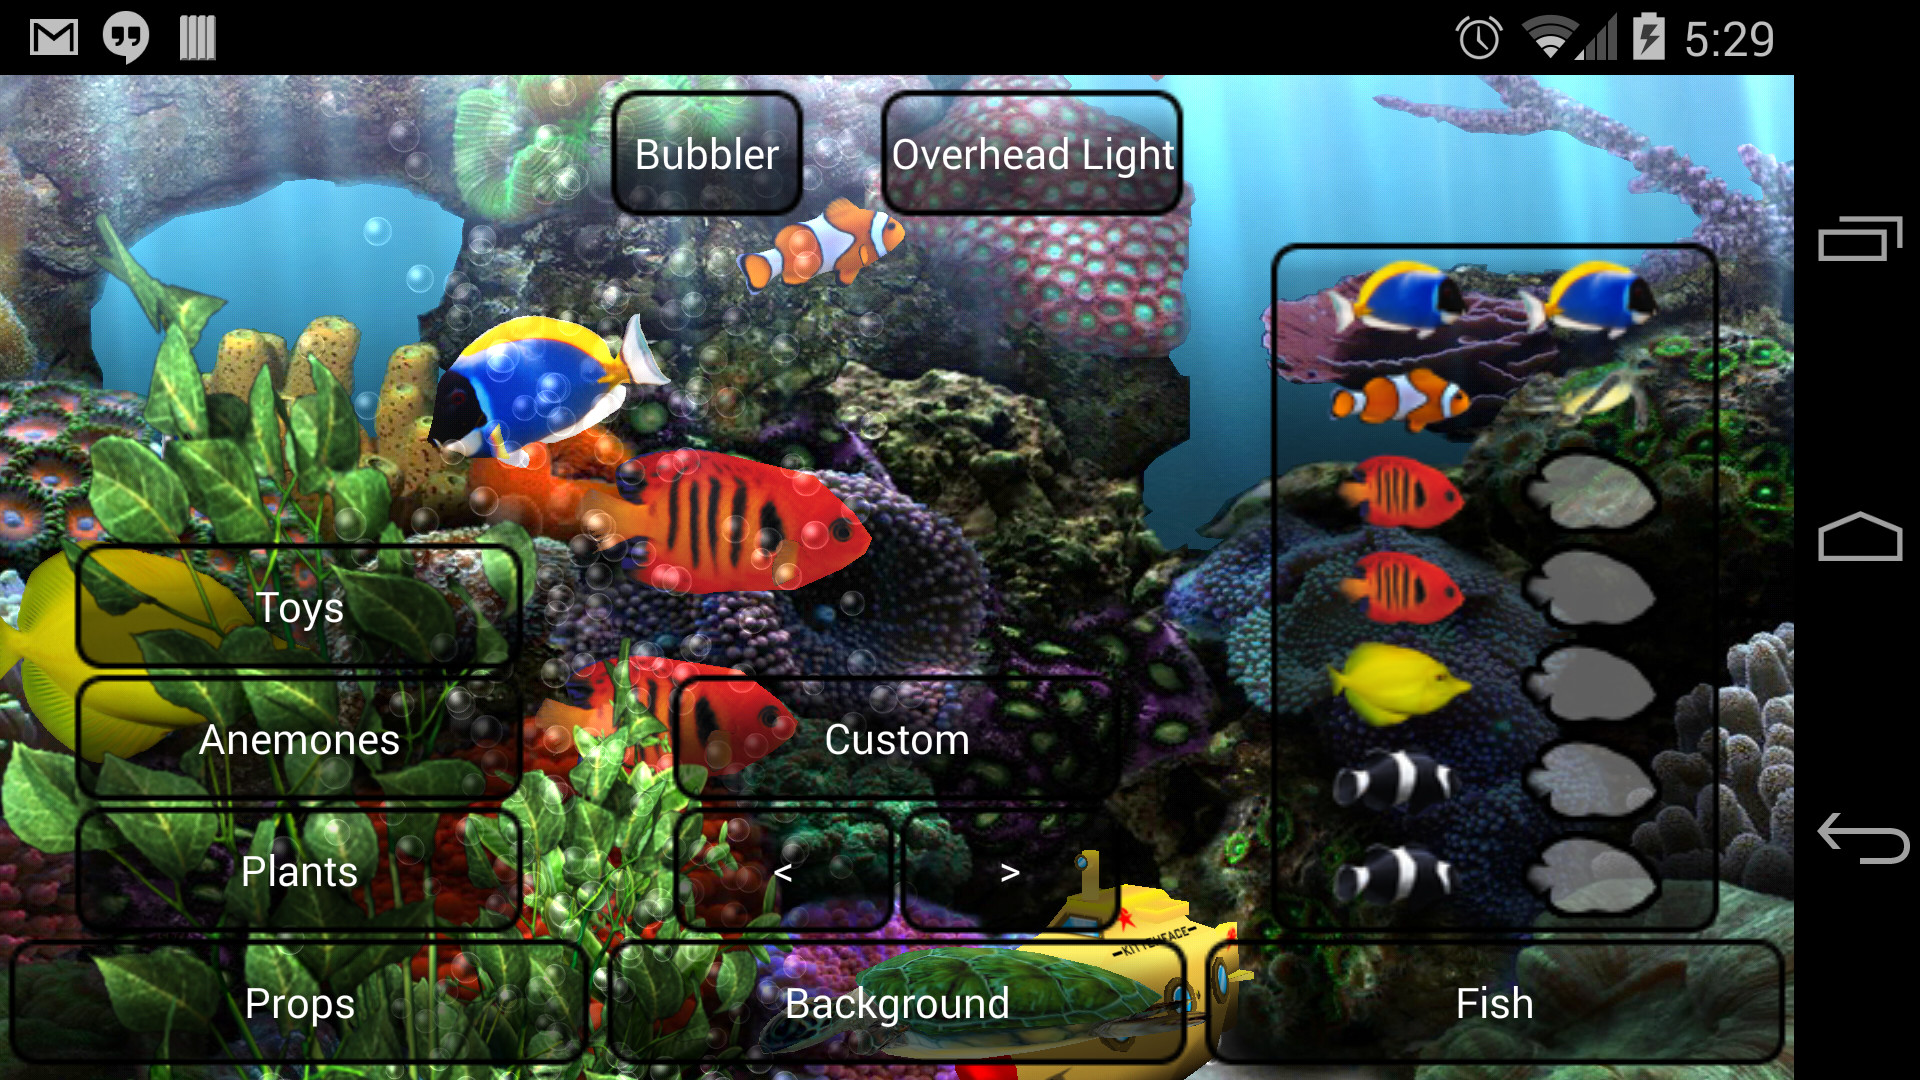 Aquarium live wallpaper android reviews at android quality index